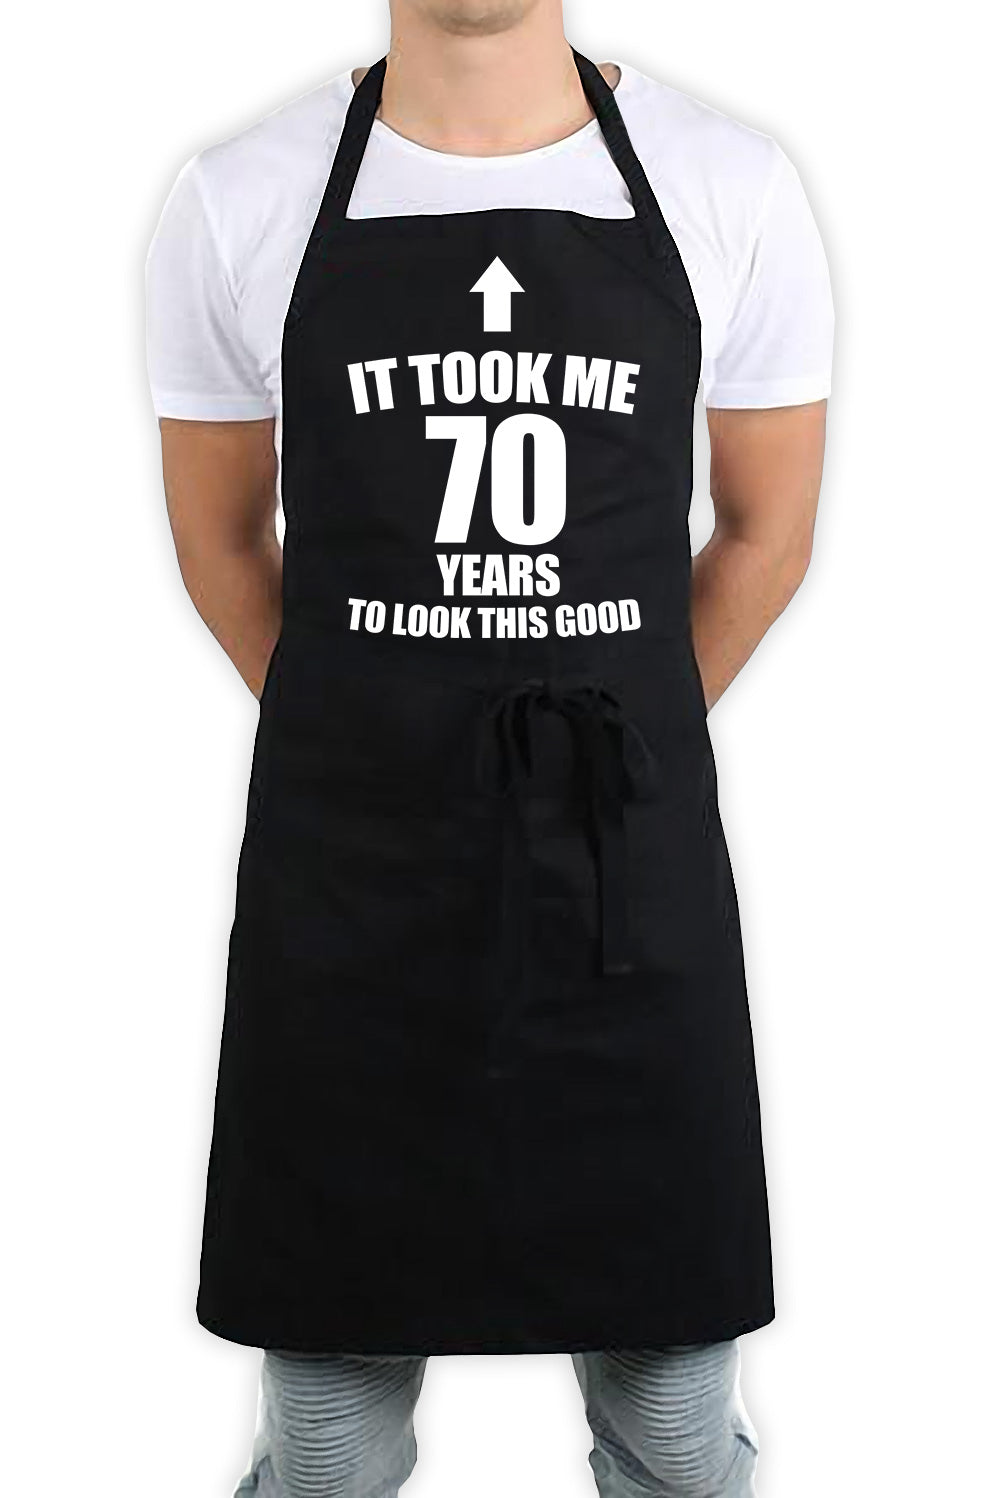 It Took Me 70 Years To Look This Good Funny Kitchen BBQ Apron Black